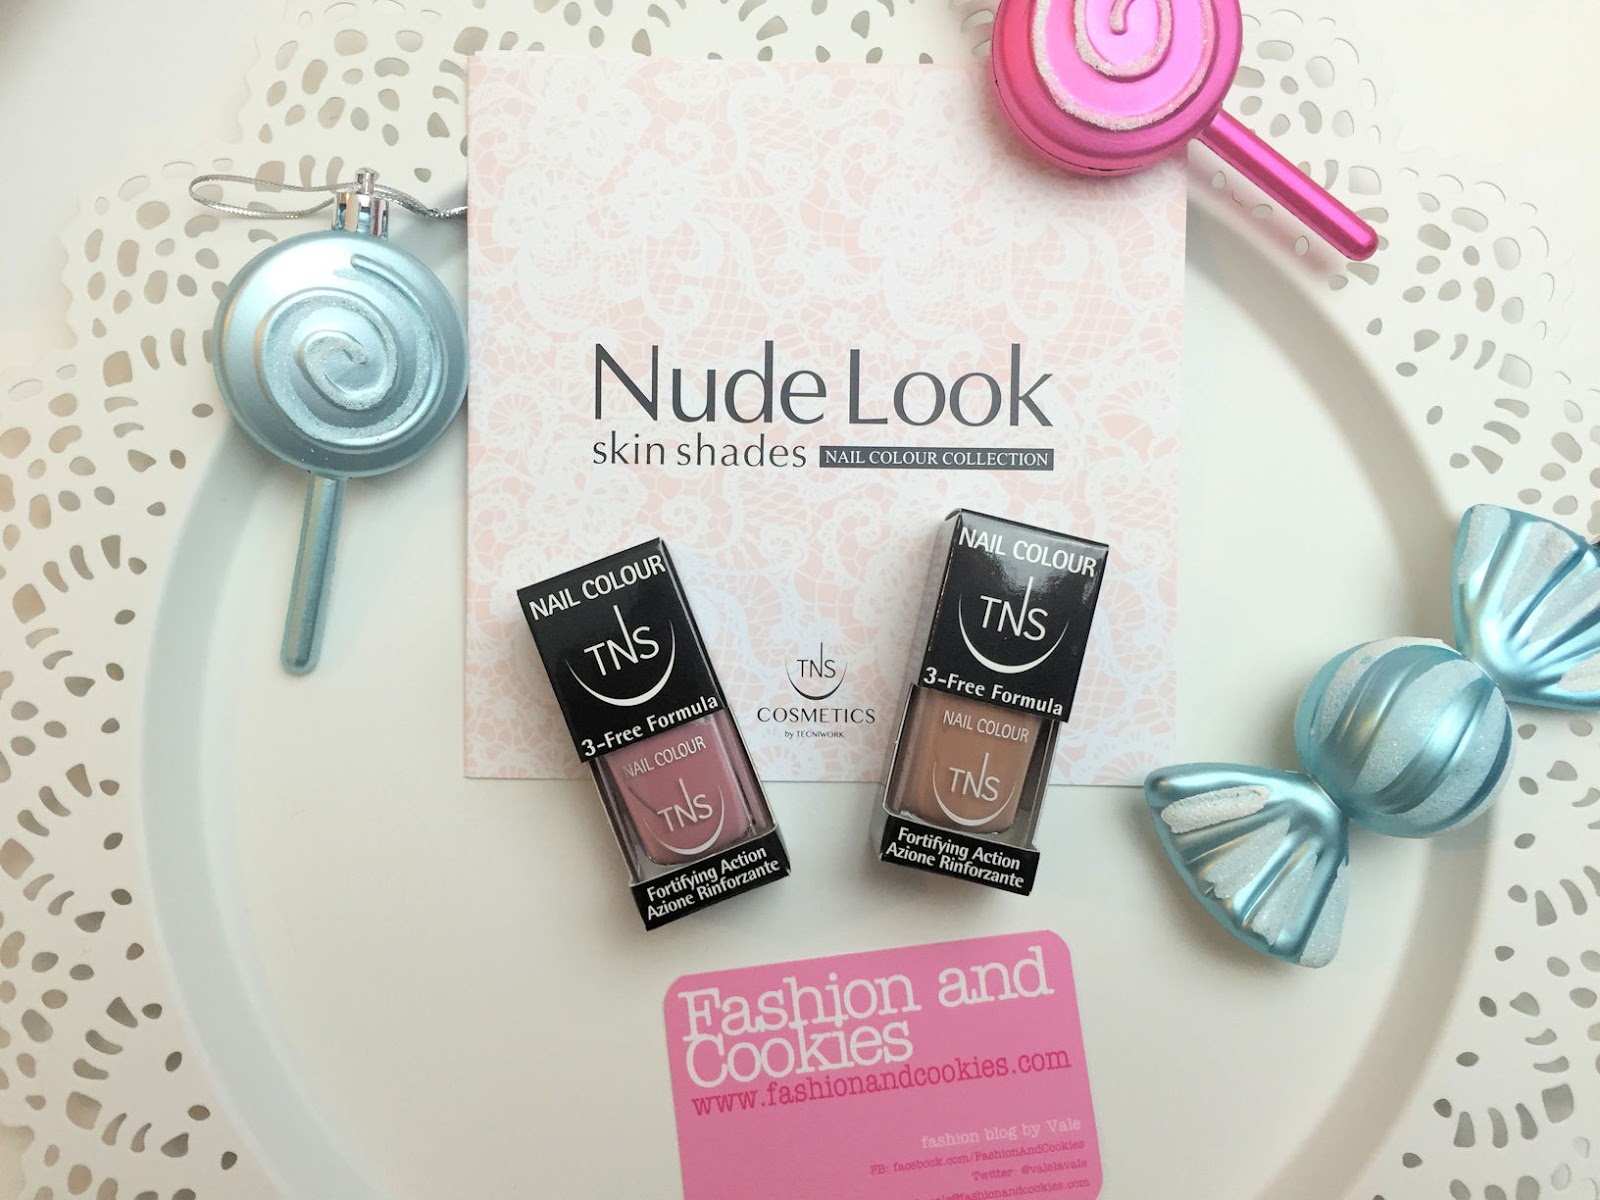 Nude Look skin shades nail polish collection by TNS Cosmetics on Fashion and Cookies beauty blog, beauty blogger review